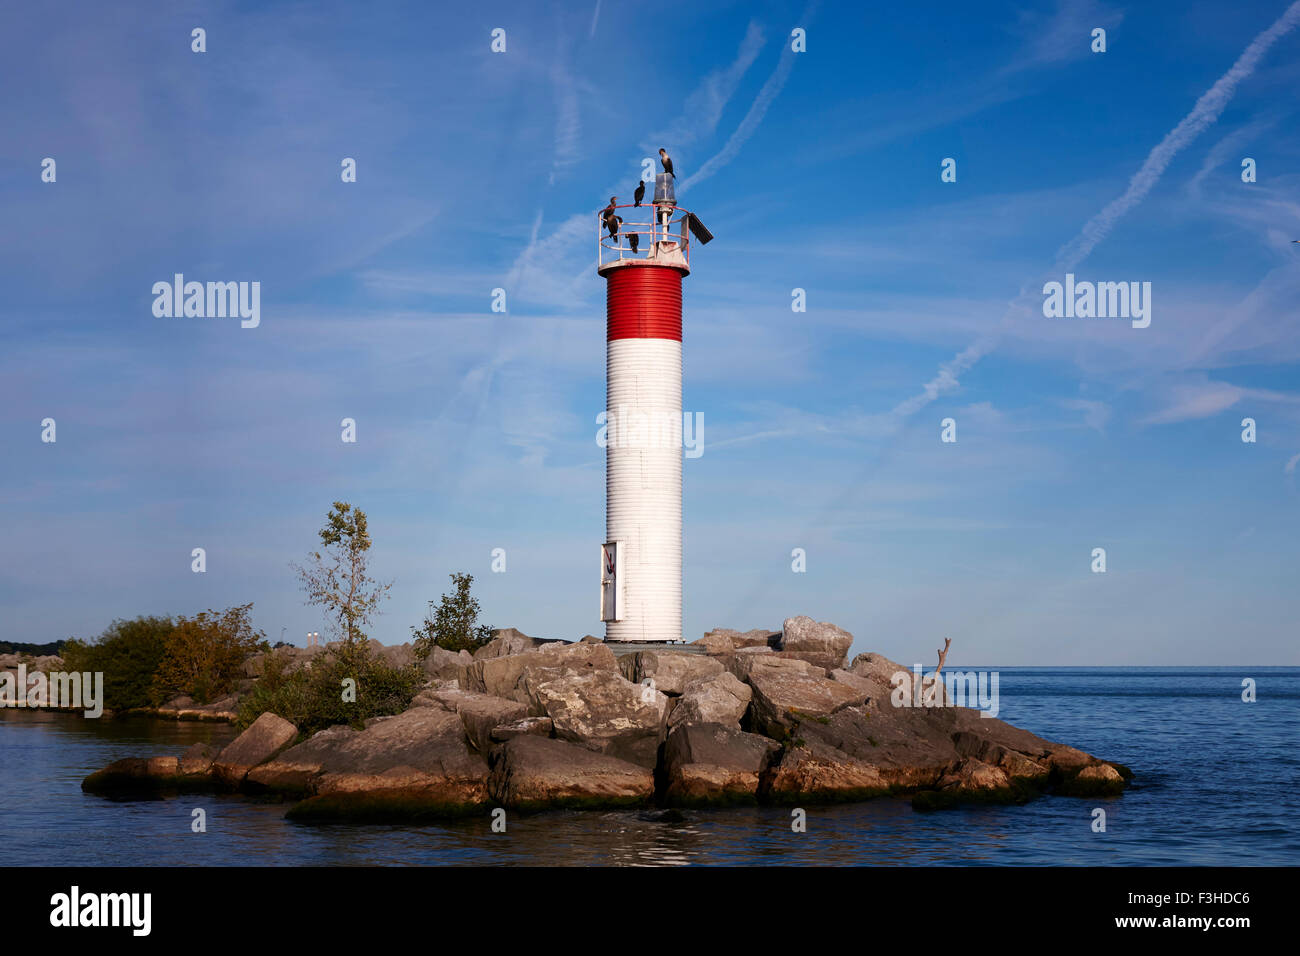 Cormorant Birds Perched On Top Of A Radio Beacon Lighthouse At The Entrance To Port Dover Harbour Ontario Canada Stock Photo